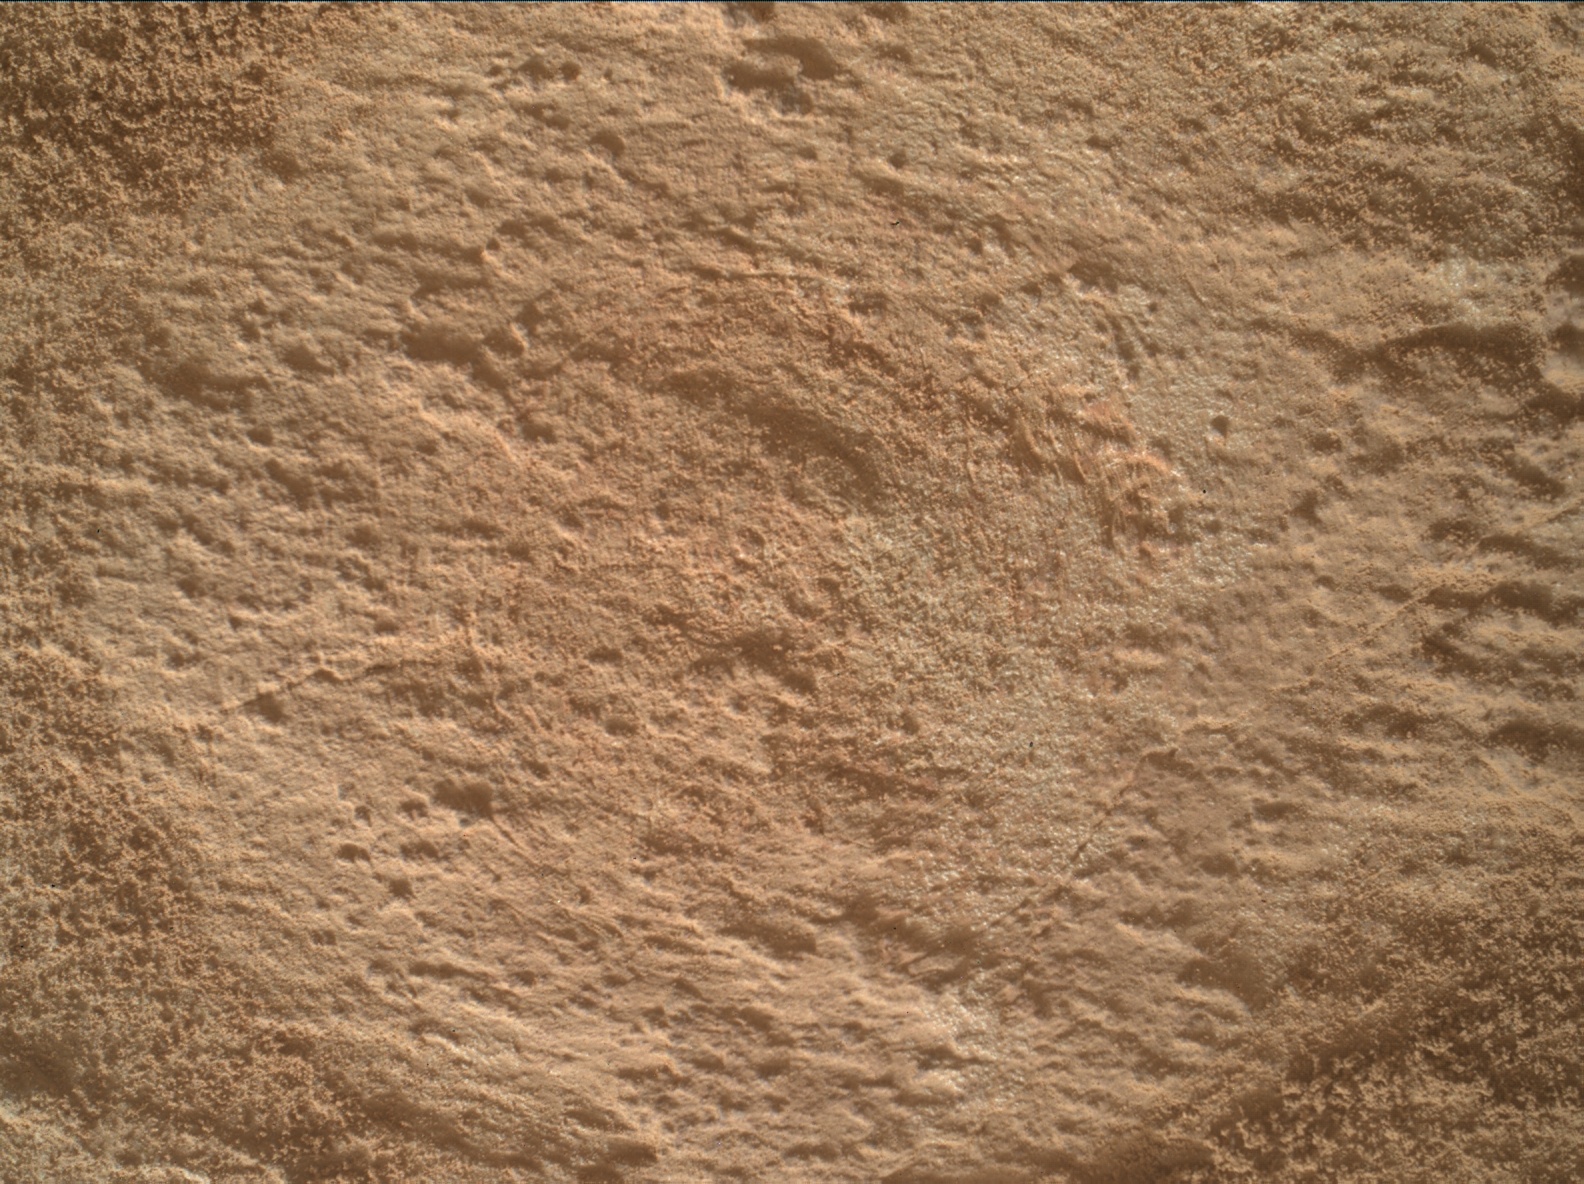 Nasa's Mars rover Curiosity acquired this image using its Mars Hand Lens Imager (MAHLI) on Sol 3541